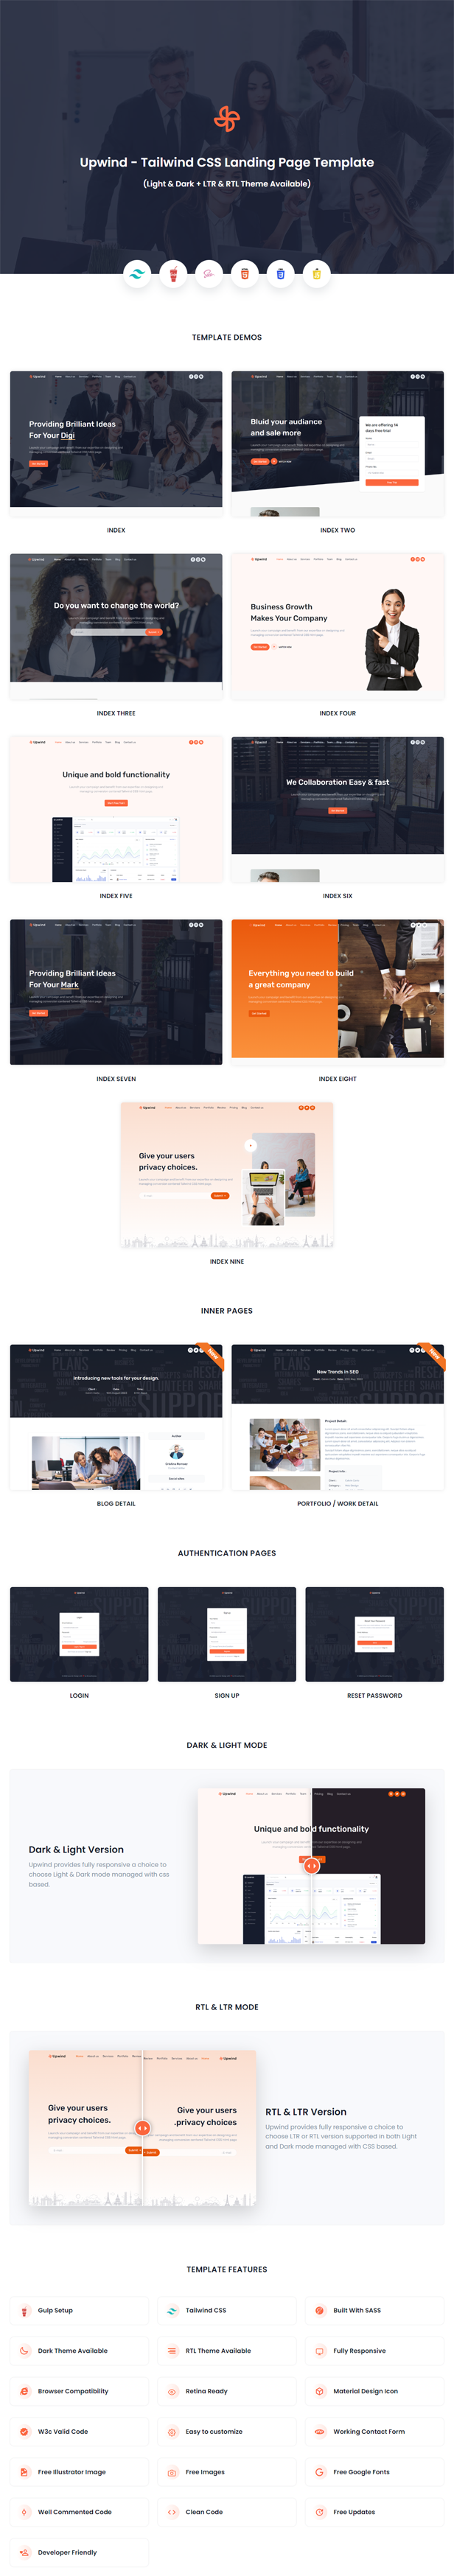 Upwind - Tailwind CSS Landing Page Template - 3